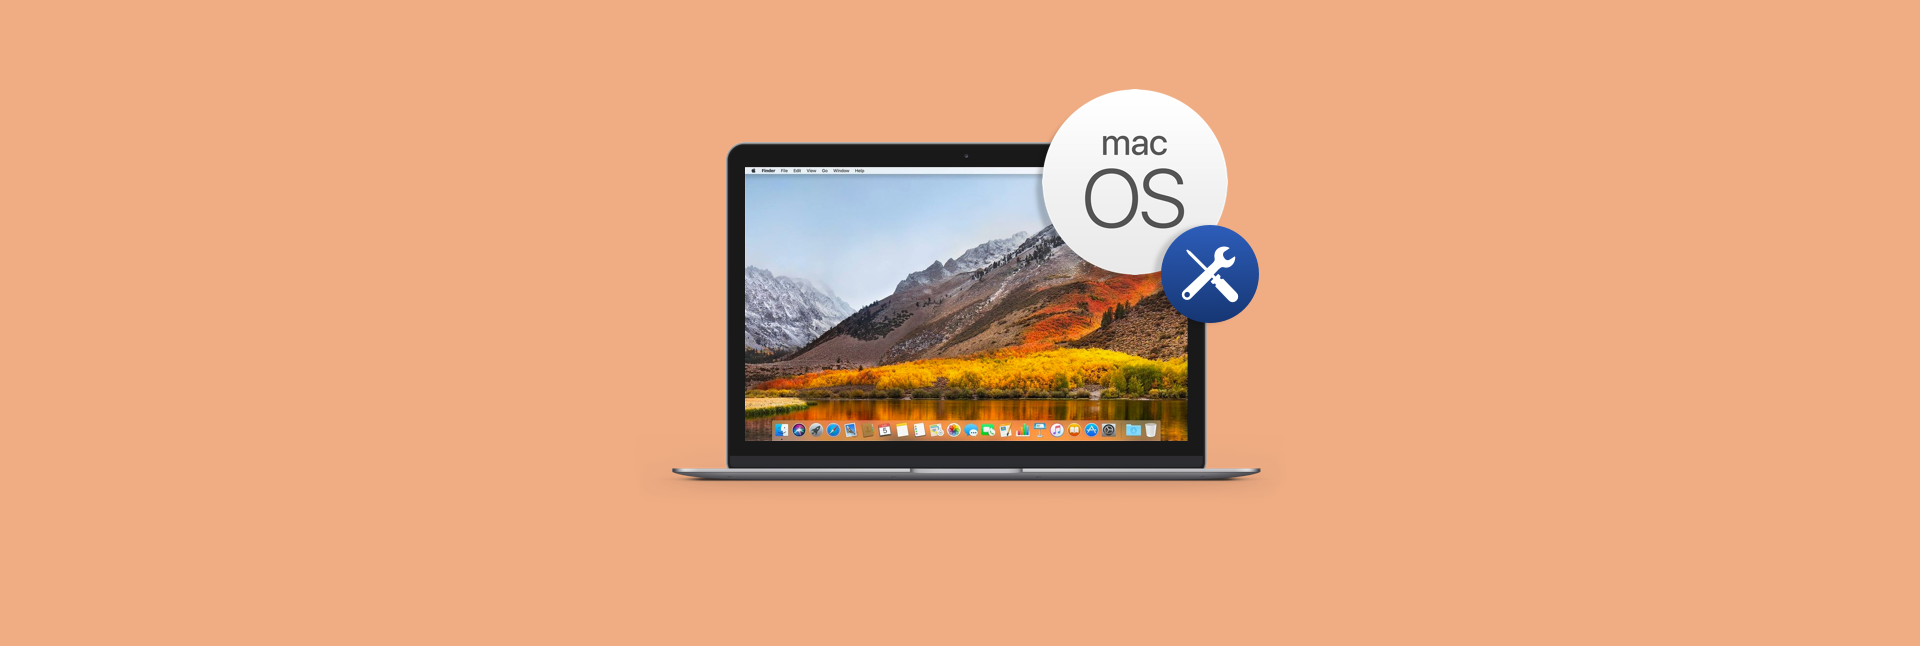 Office for mac 2011 compatible with sierra